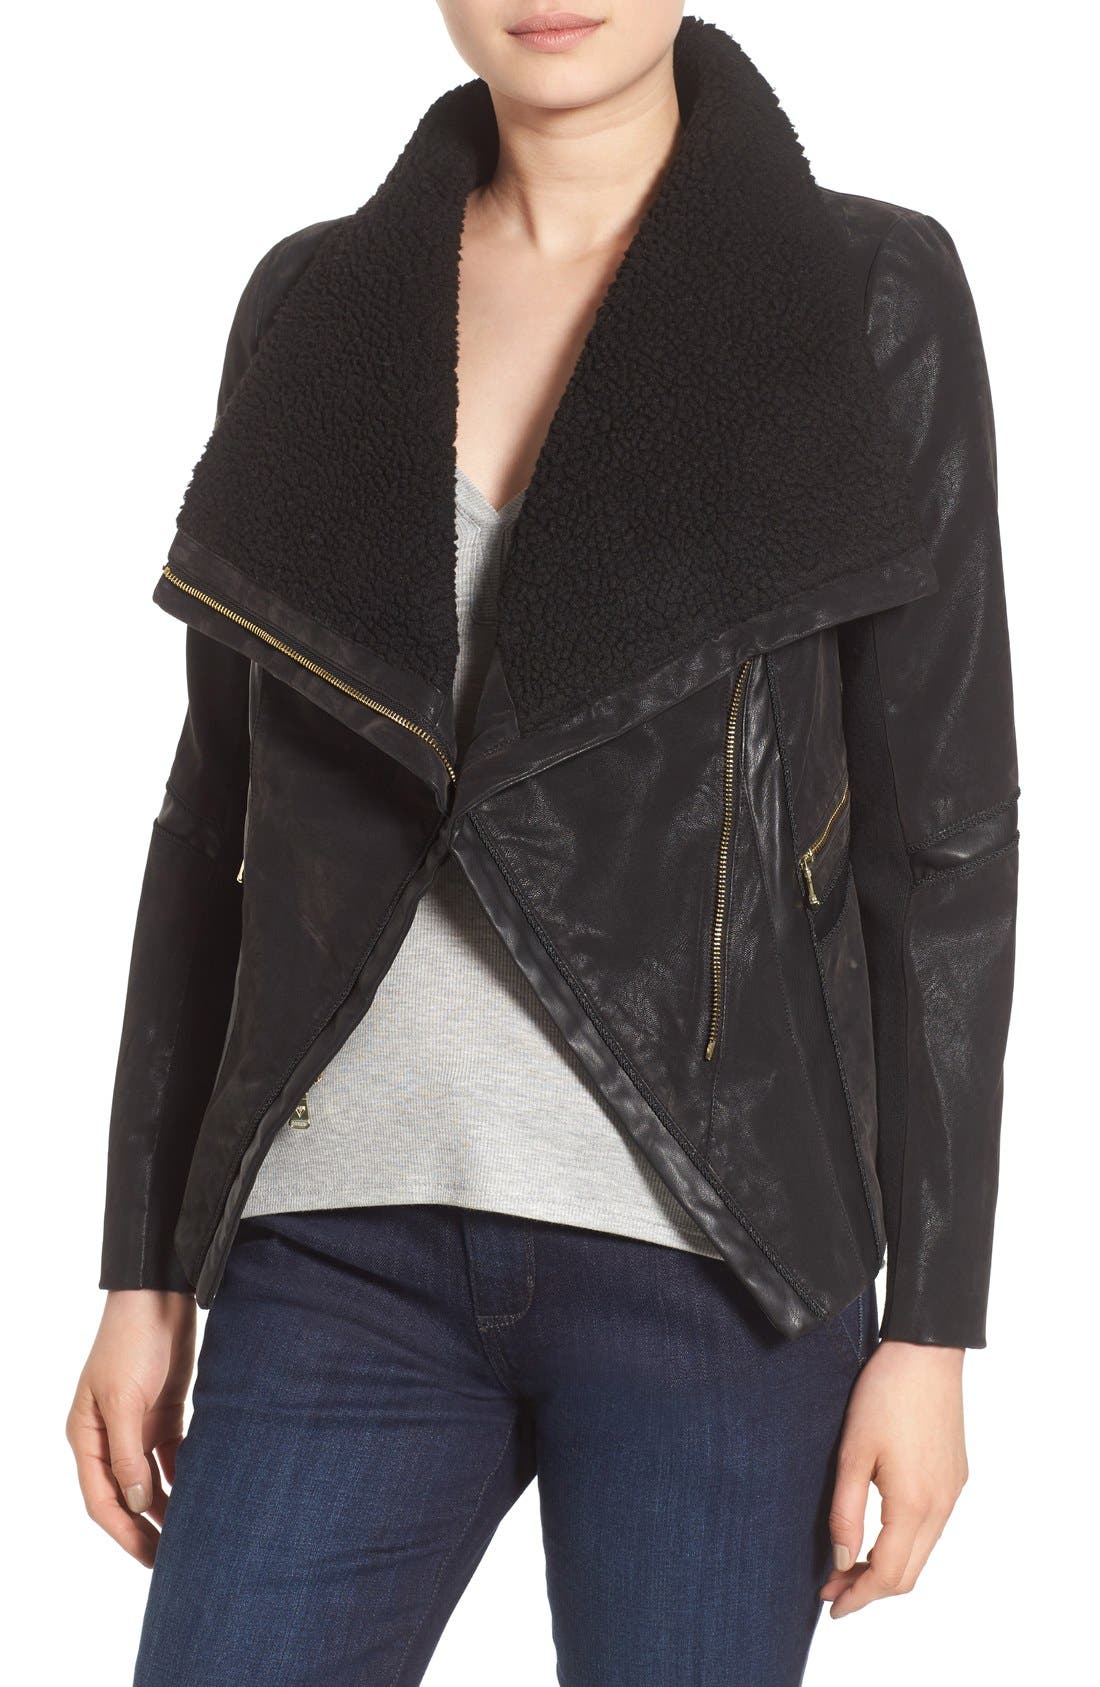 guess leather jacket with faux fur collar